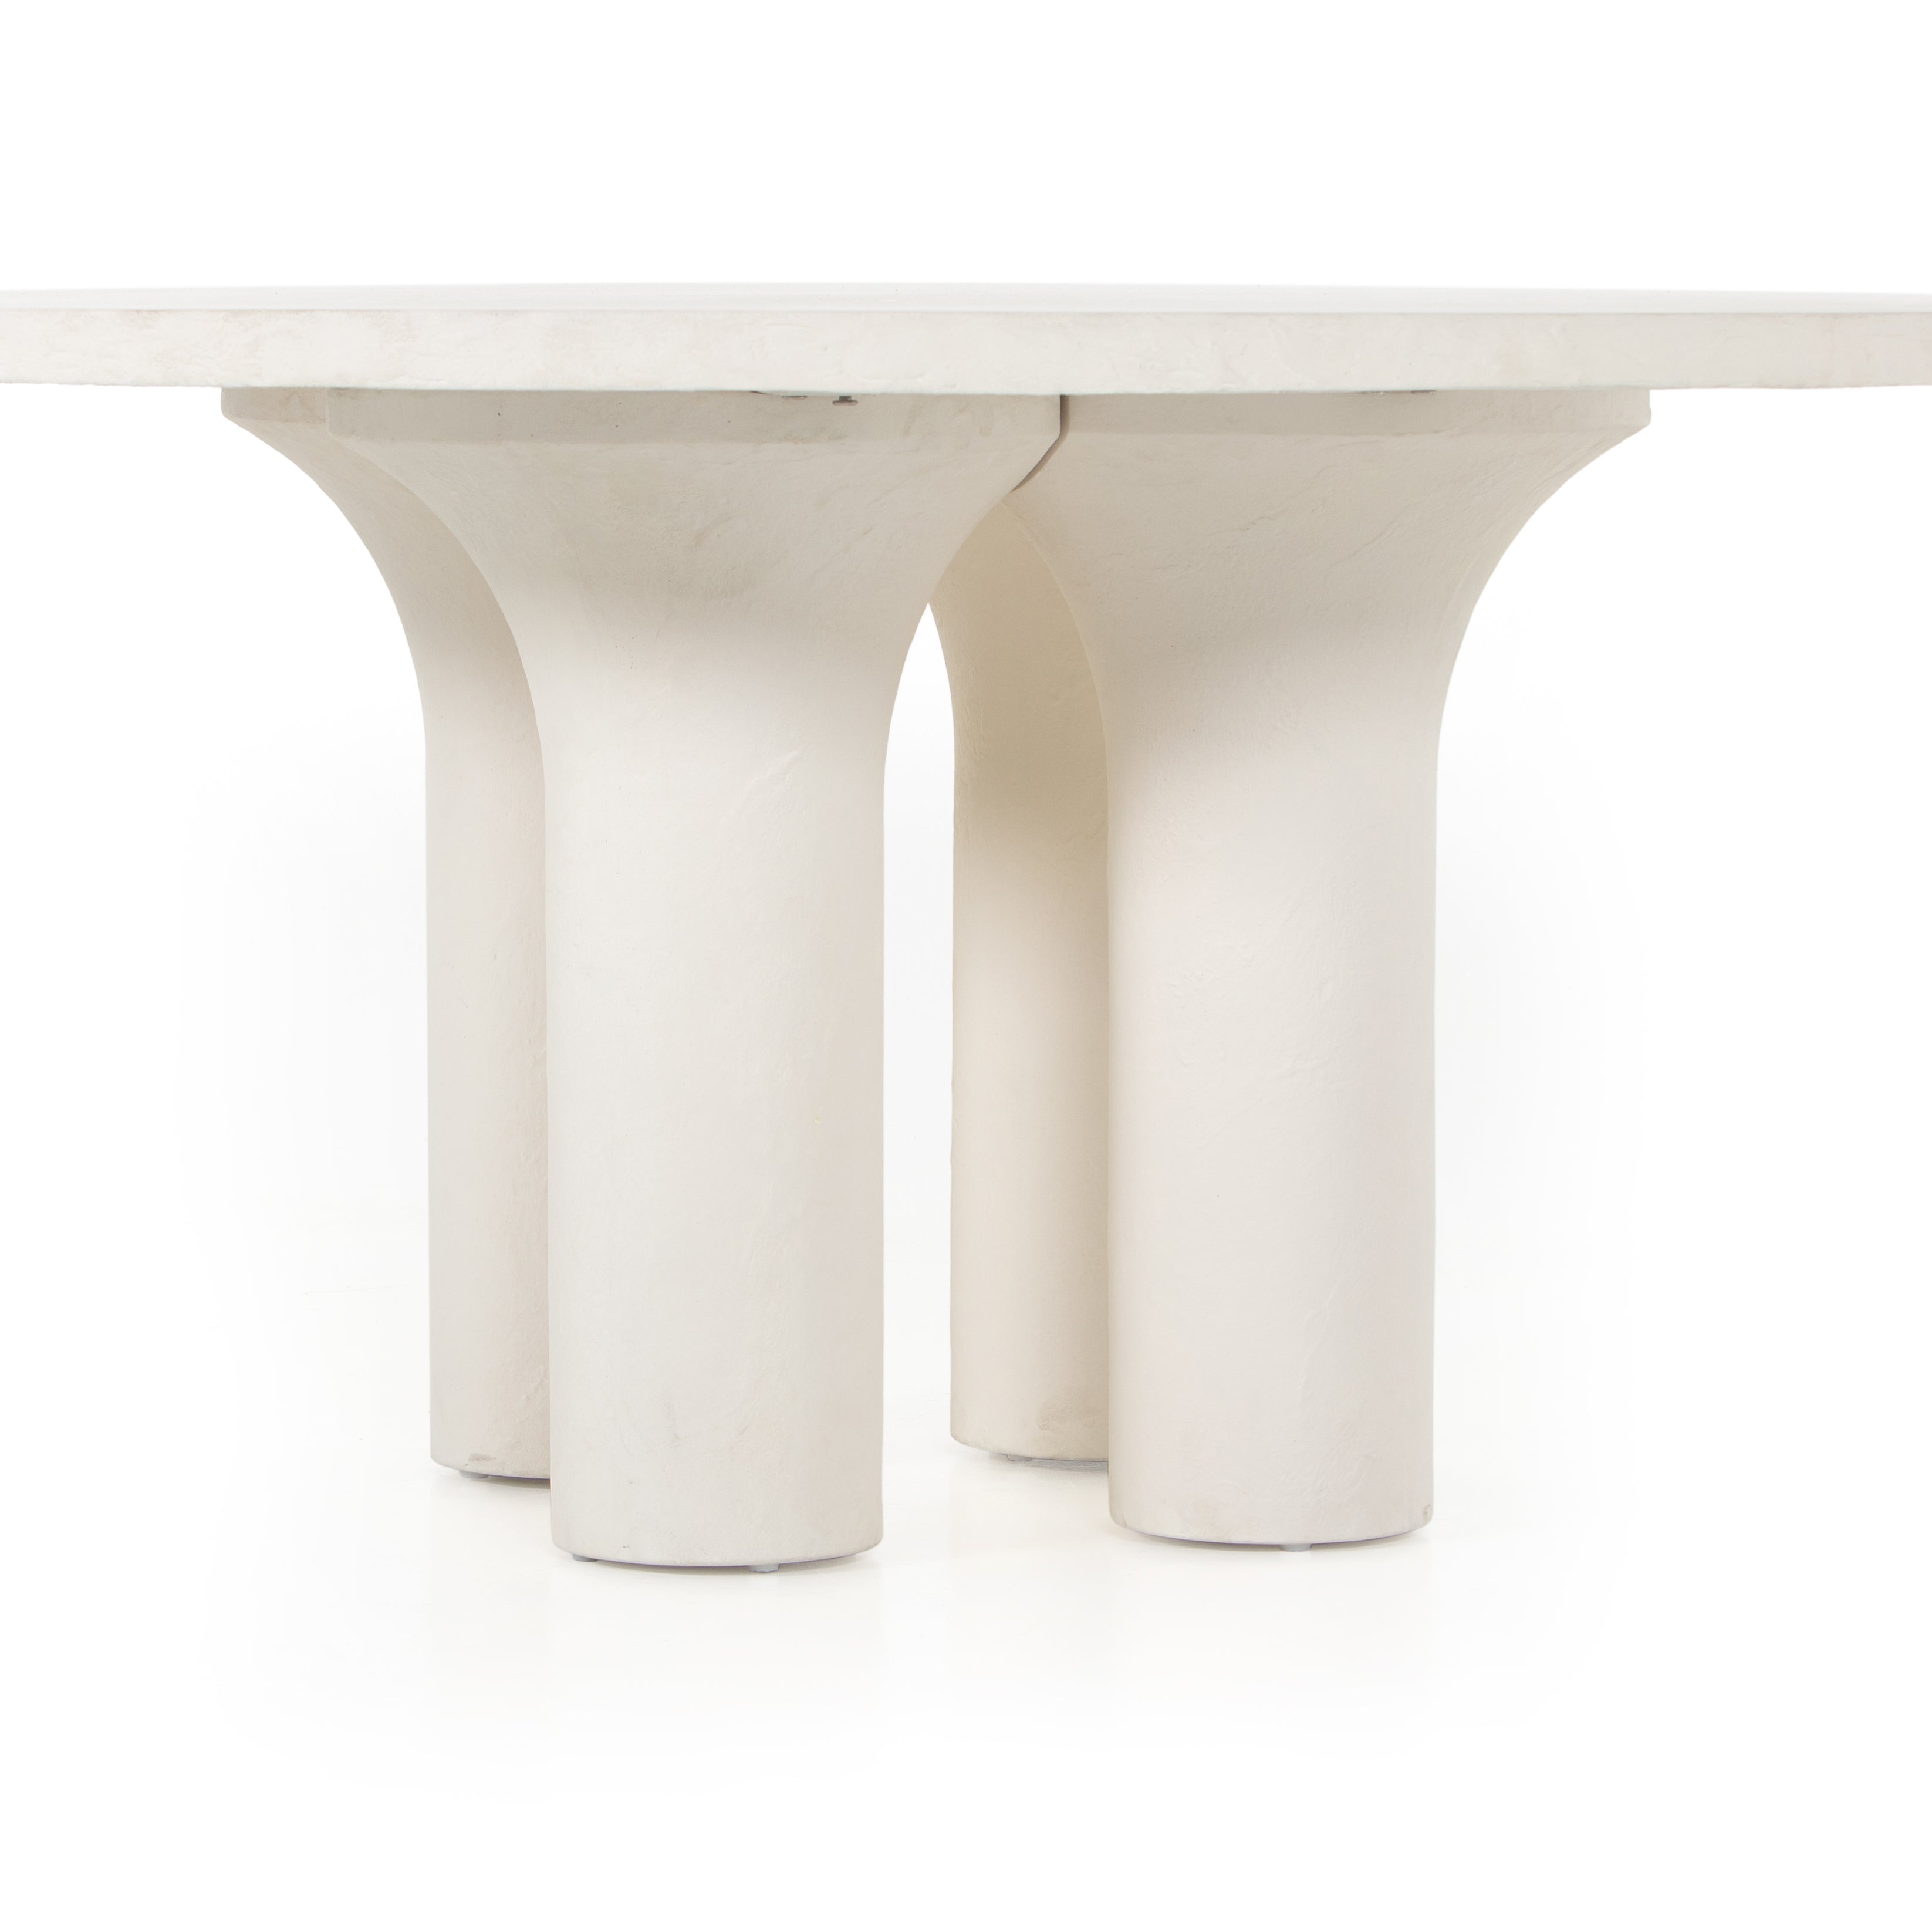 This Parra Dining Table - Plaster Molded Concrete is made from plaster-molded concrete with a cylindrical pillar-style base tapering slightly to support a smooth, white-finished tabletop. We love the texture and brightness this brings to any dining room or kitchen area.   Overall Dimensions: 59.75"w x 59.75"d x 30.00"h